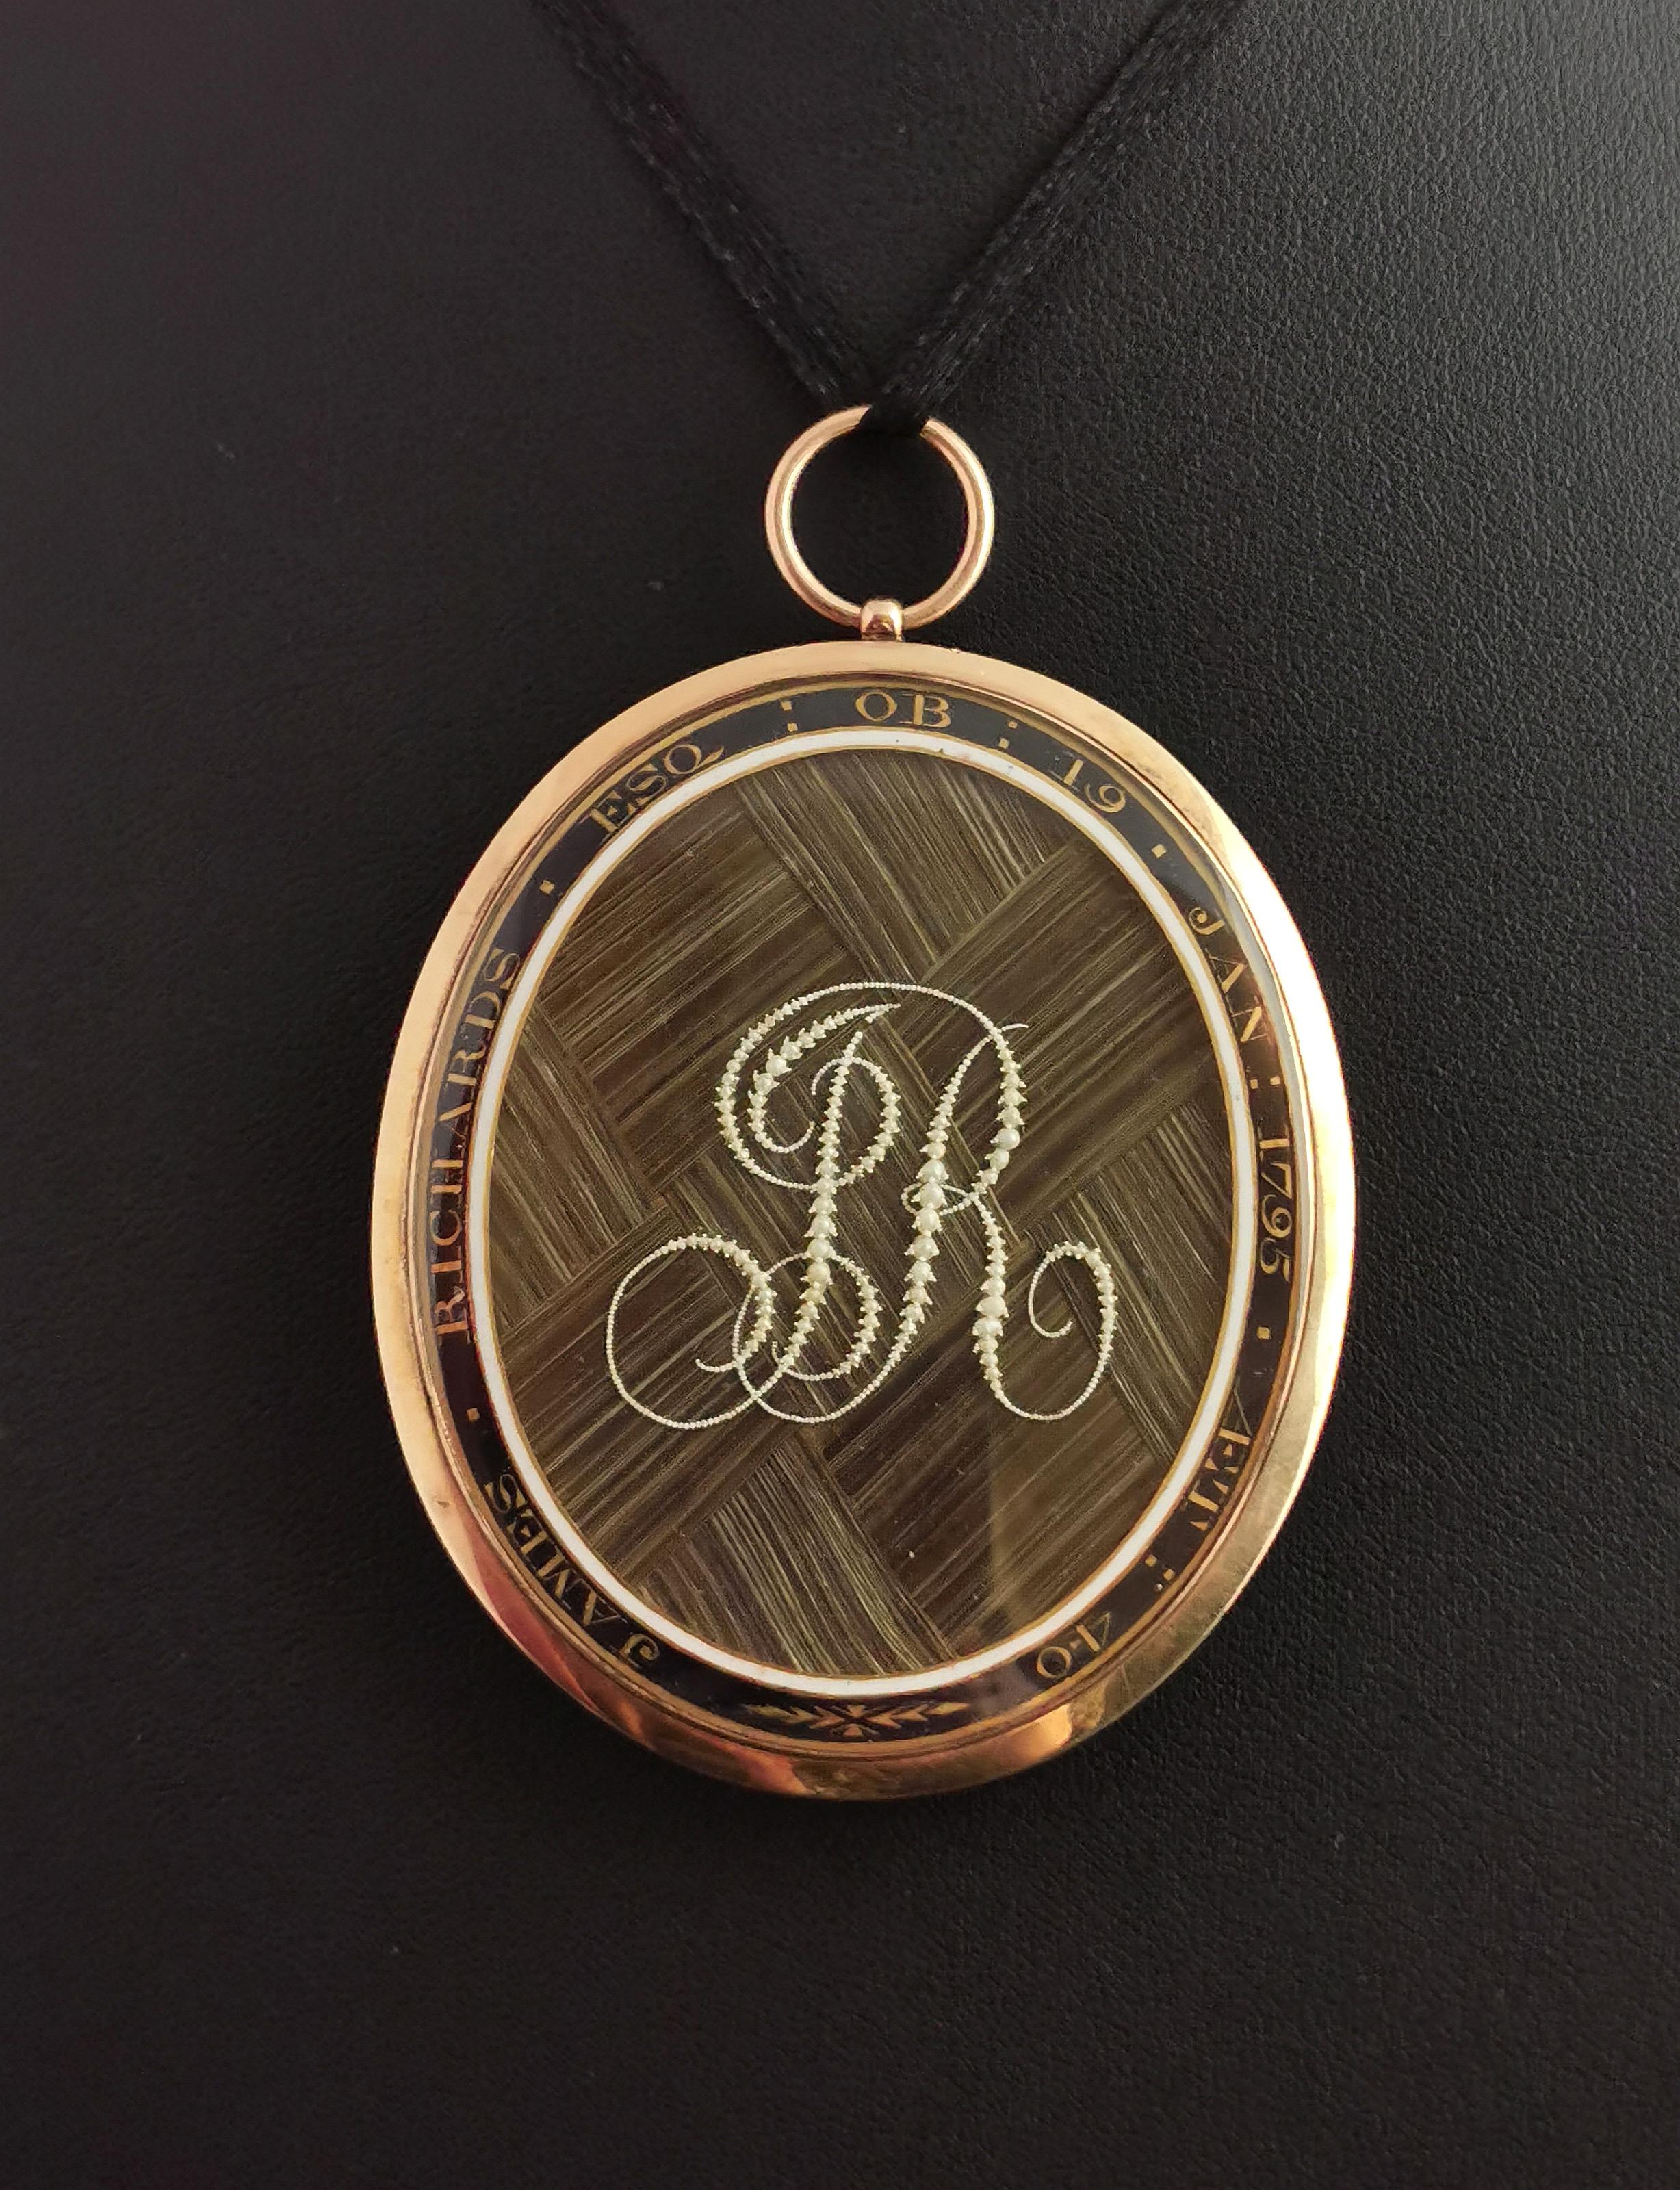 An impeccable and important antique Georgian mourning locket.

The beauty and craftsmanship of this piece are second to none and can only be found in such prestigious Georgian pieces.

The locket is glazed both sides in a rich 9 karat gold frame